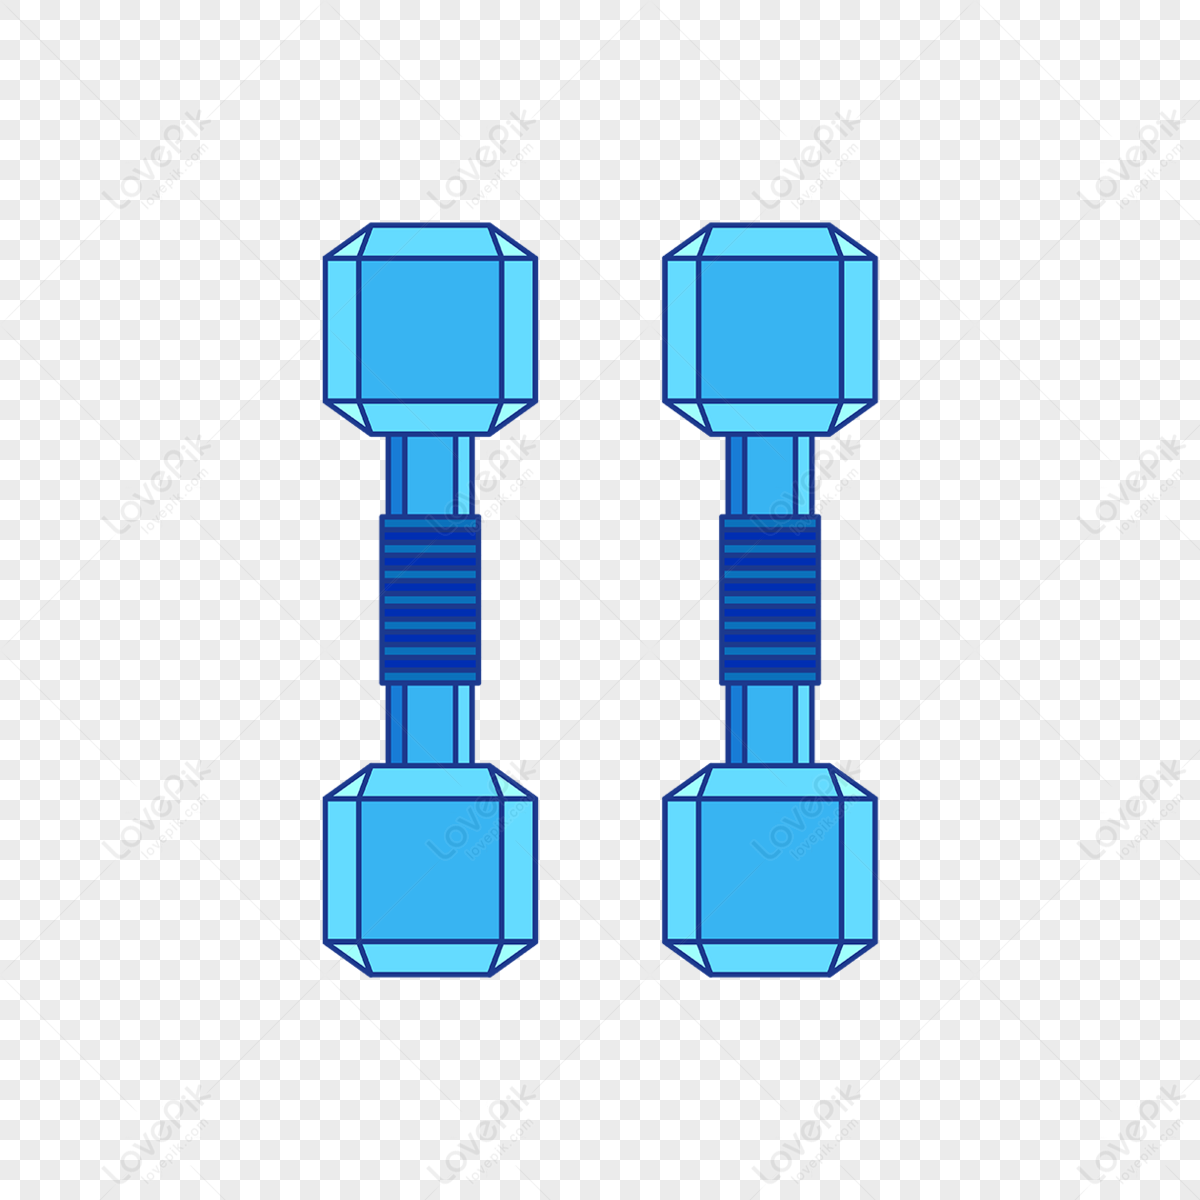 Close Up Of Young Sporting Women Practicing Dumbbells PNG Transparent  Background And Clipart Image For Free Download - Lovepik